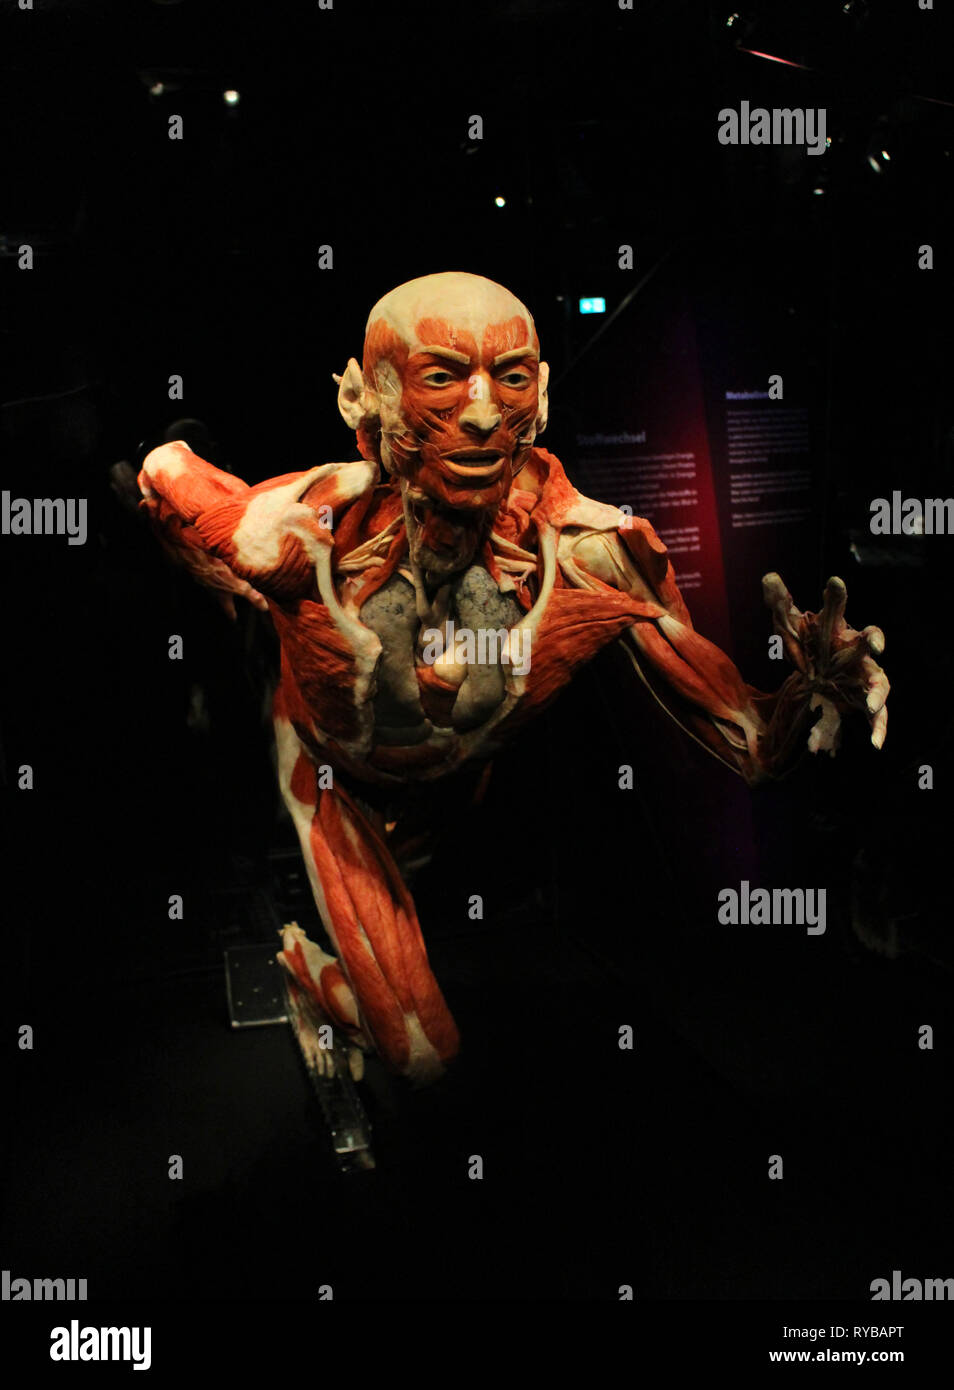 Images of the Body Worlds plastinates at the Menschen Museum Berlin. Human athlete Stock Photo